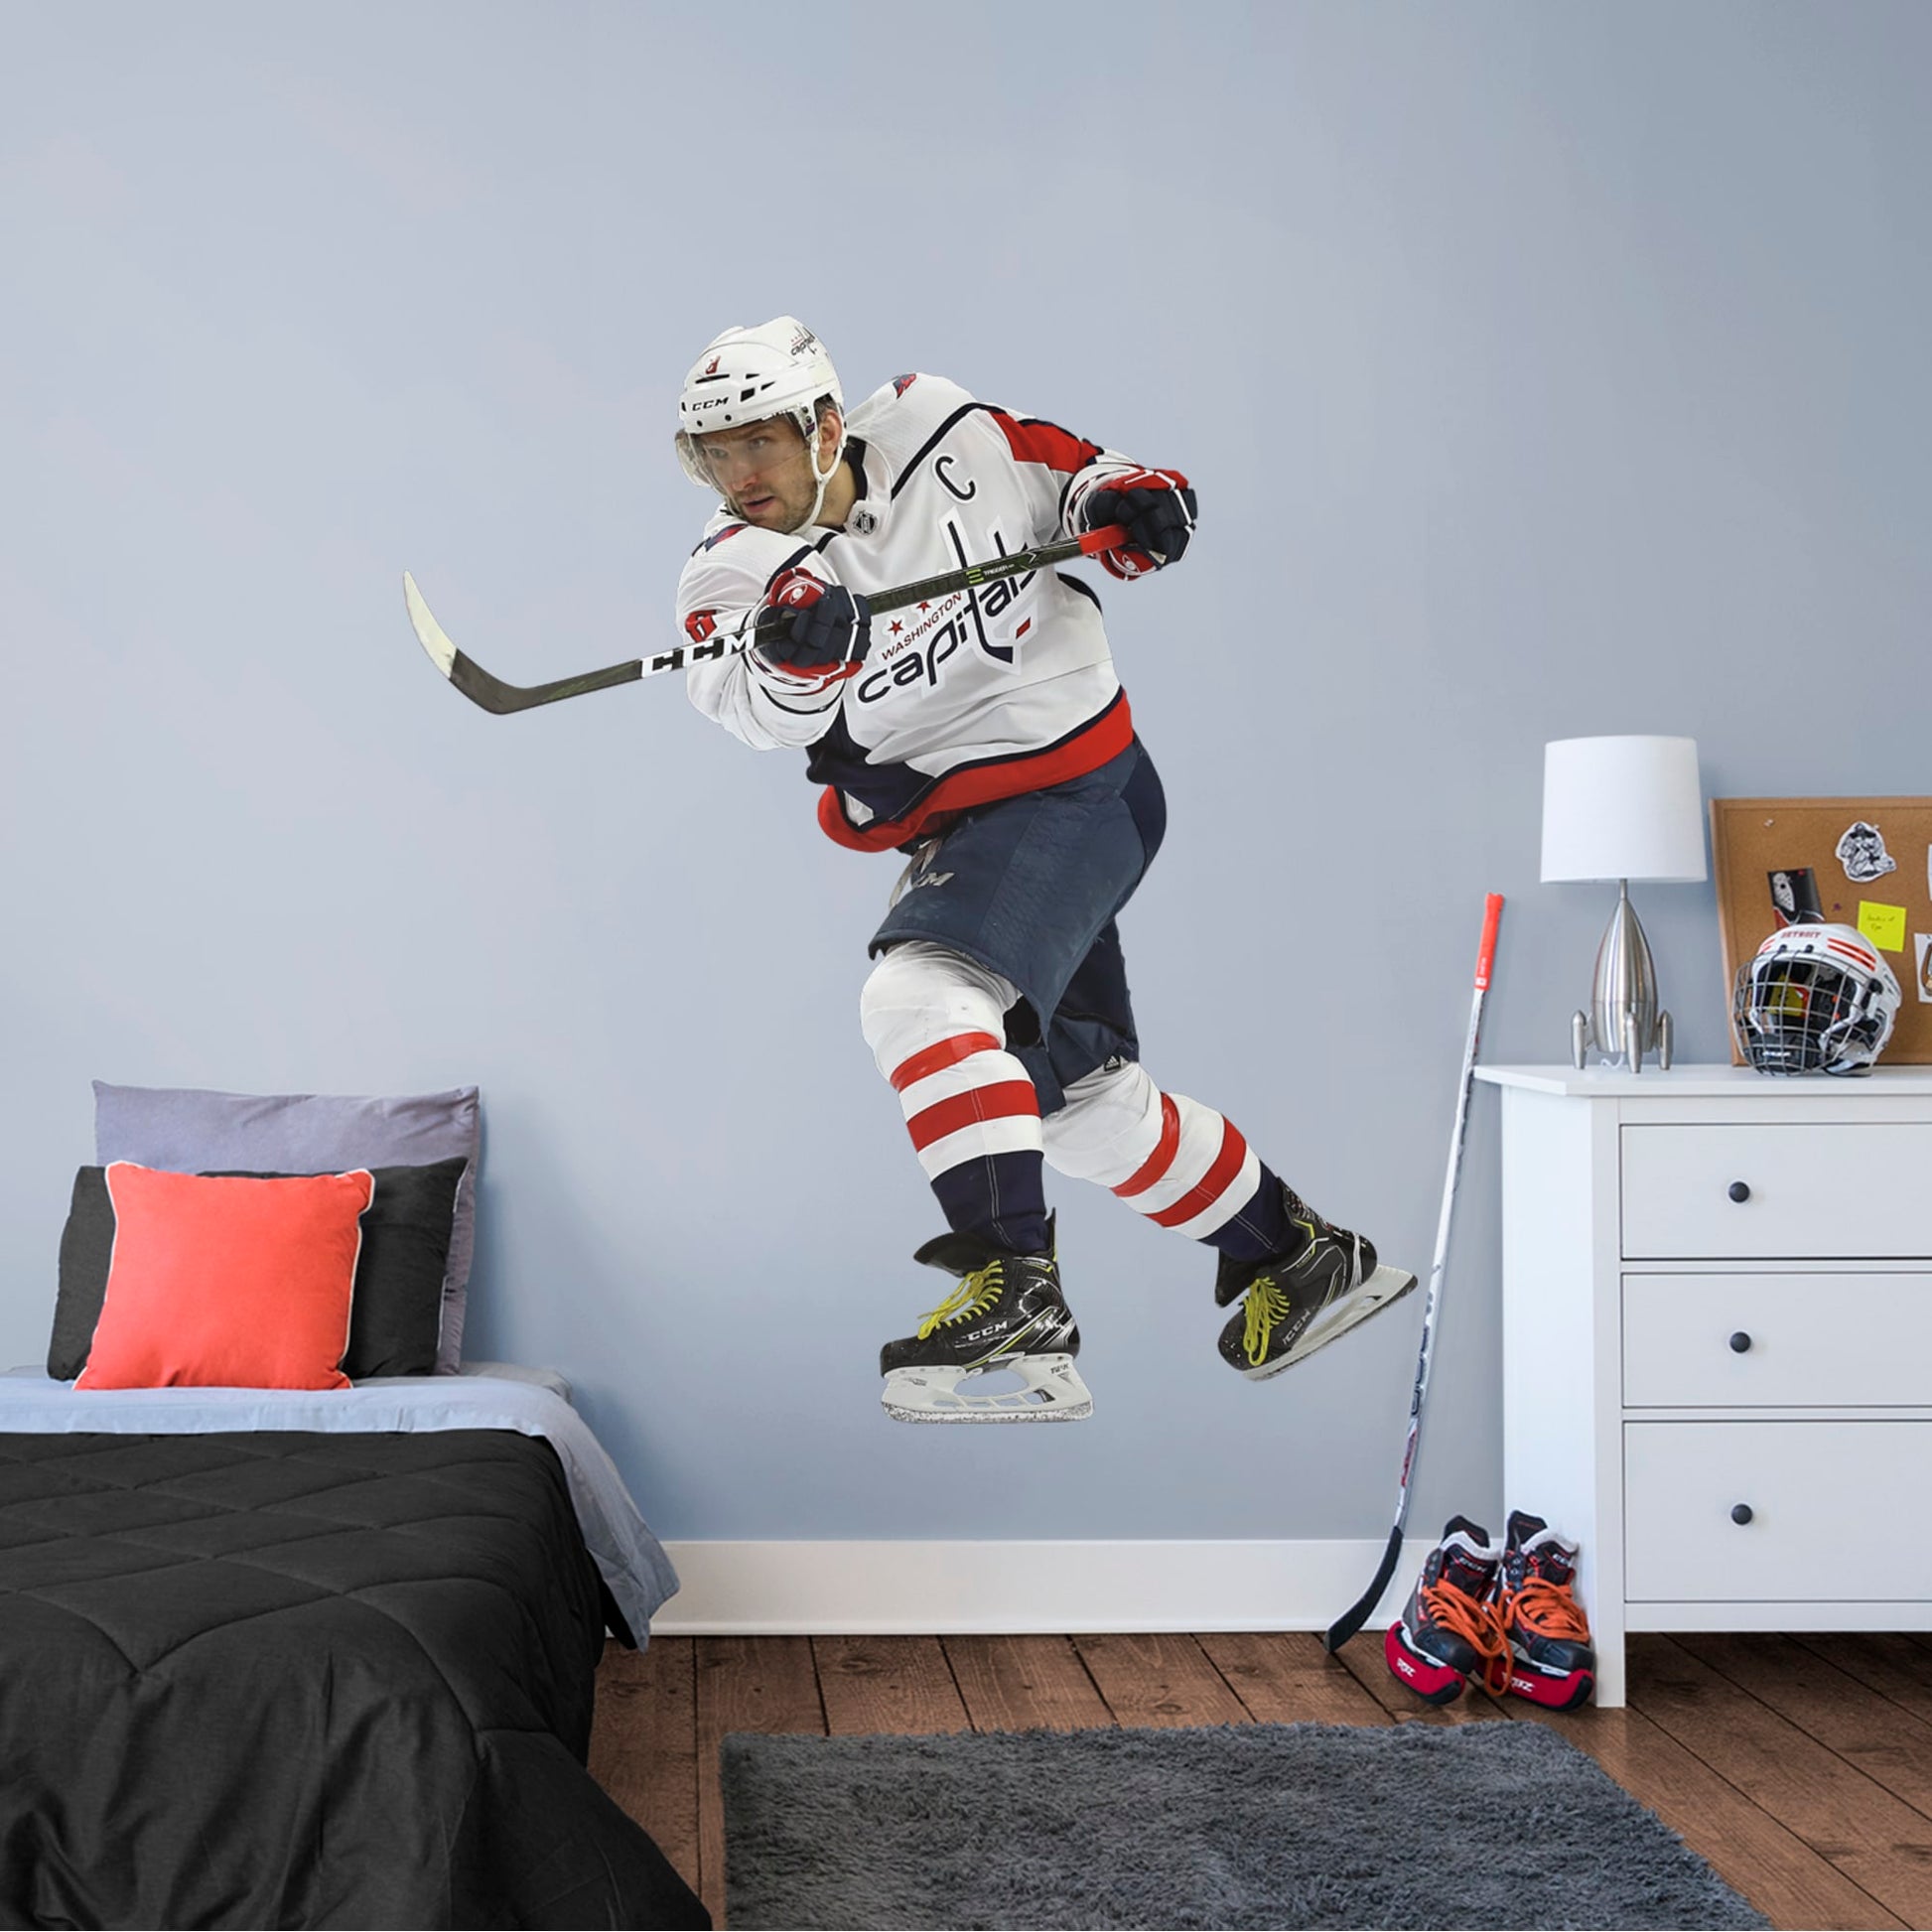 Life-Size Athlete + 9 Decals (67"W x 74"H) History in in the making! One look at his vicious one-timer, and you know Alex Ovechkin is a living legend on ice. Well on his way to being the greatest goal scorer in the NHL, Ovi is giving Gretzky a run for his money. Cheer on the Capitals and your favorite left winger with a high-grade vinyl reusable decal of the Great Eight.